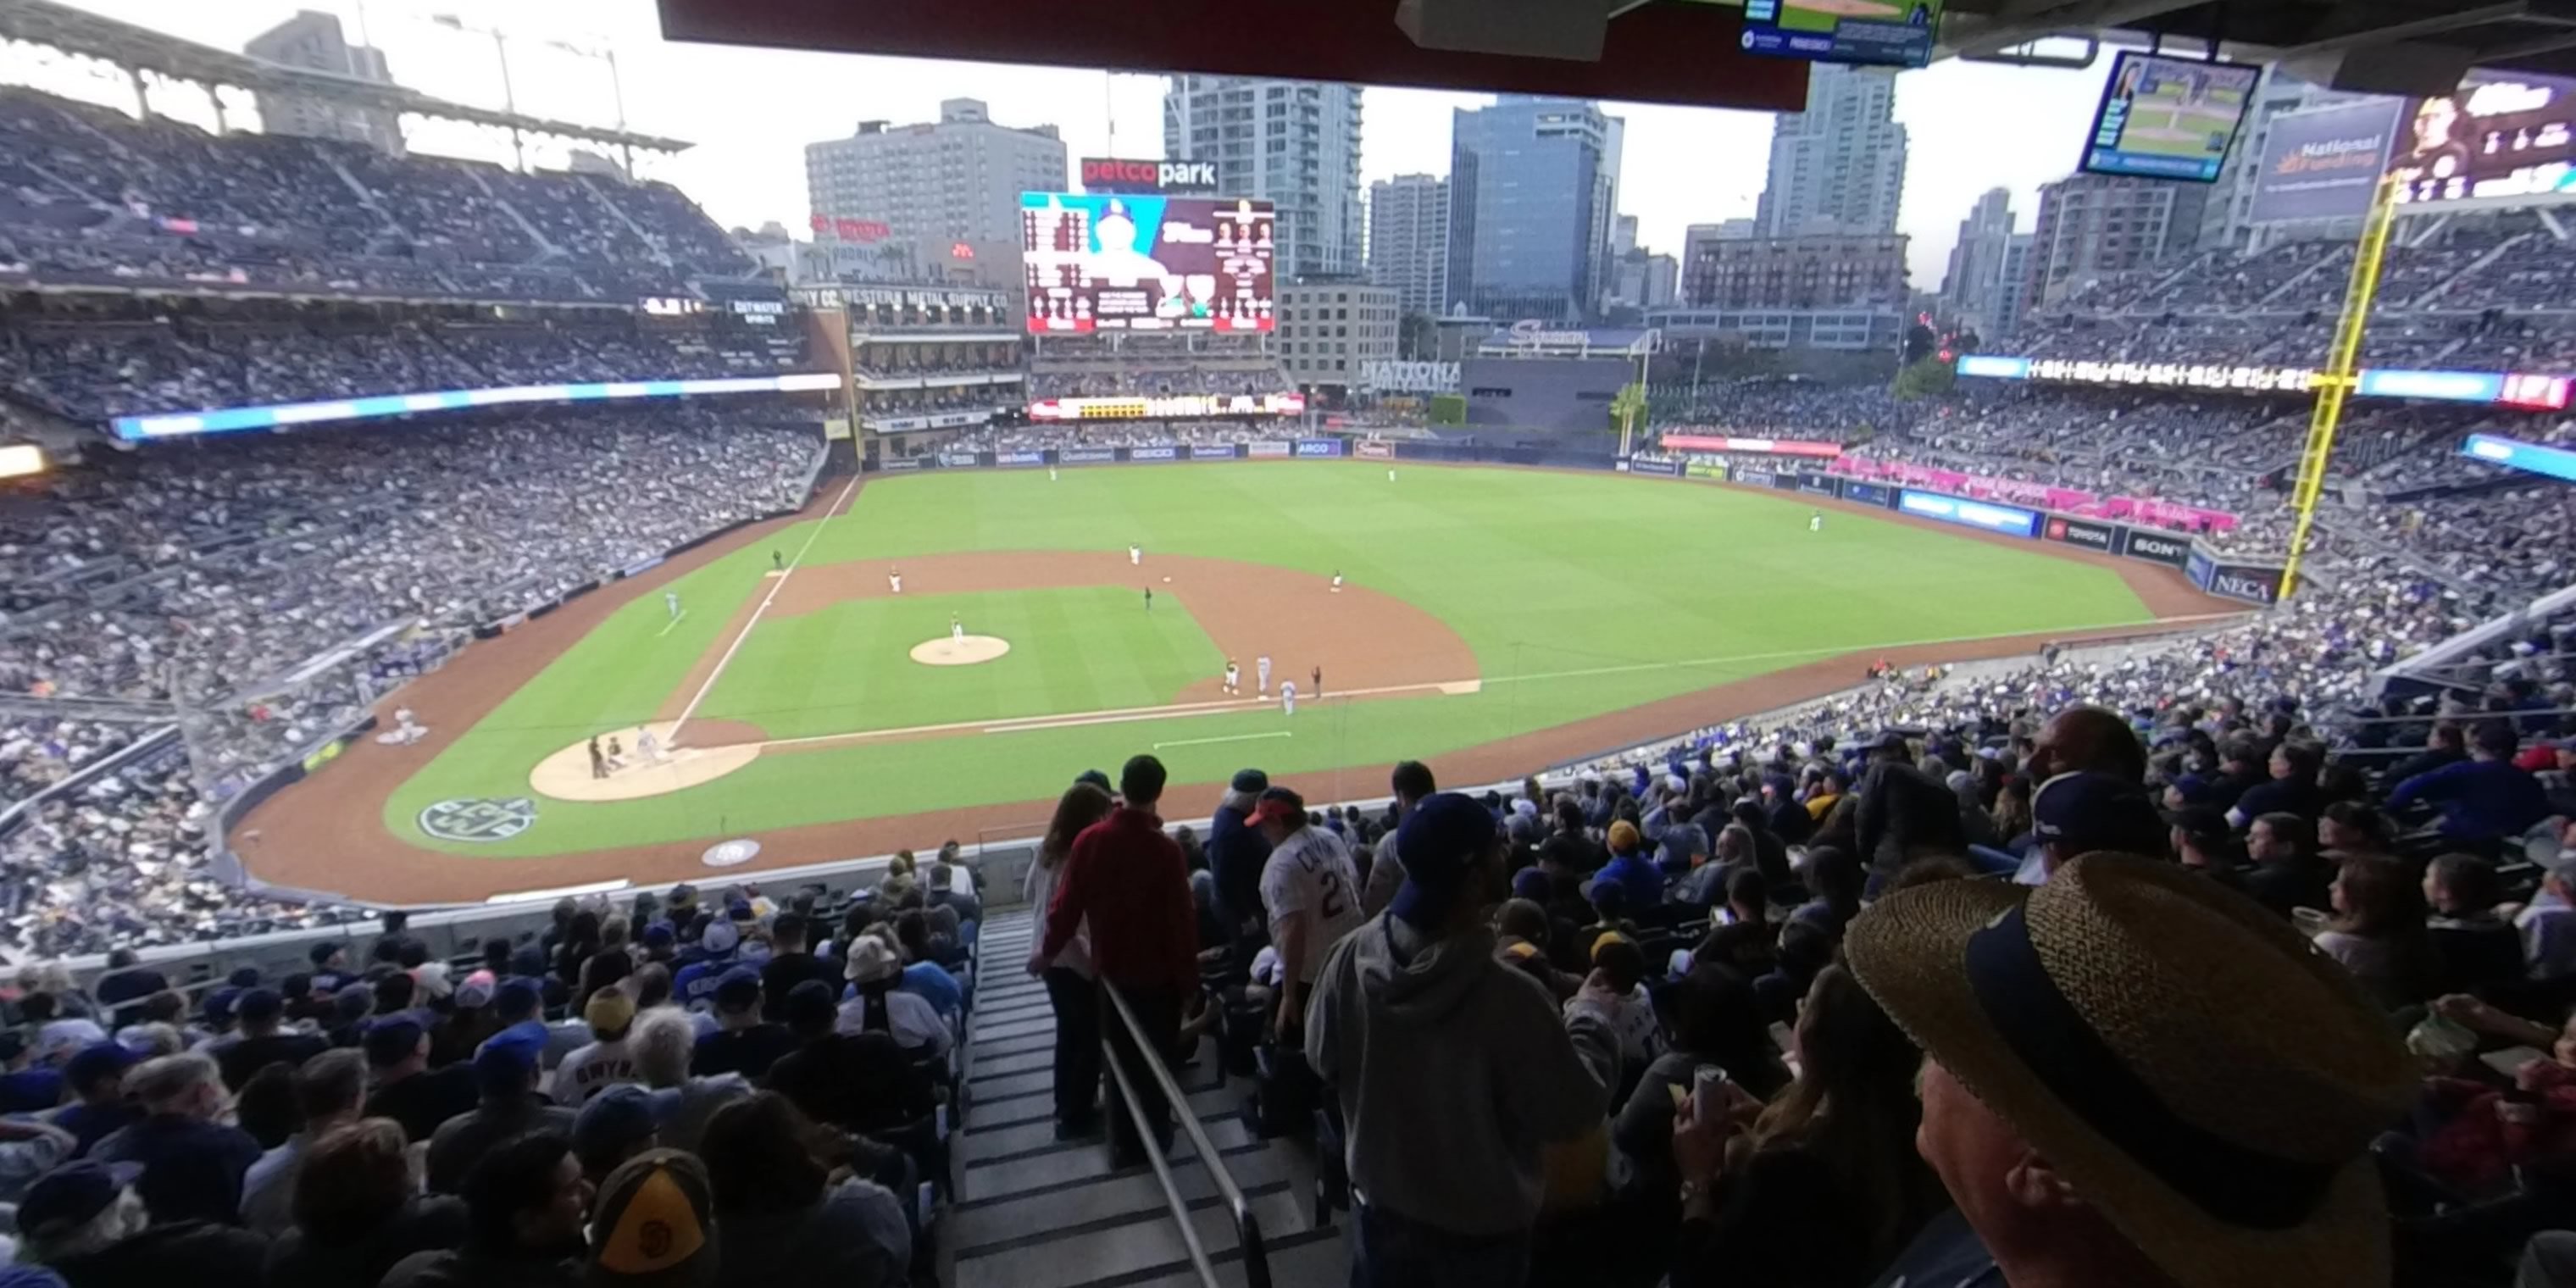 section 205 panoramic seat view  for baseball - petco park